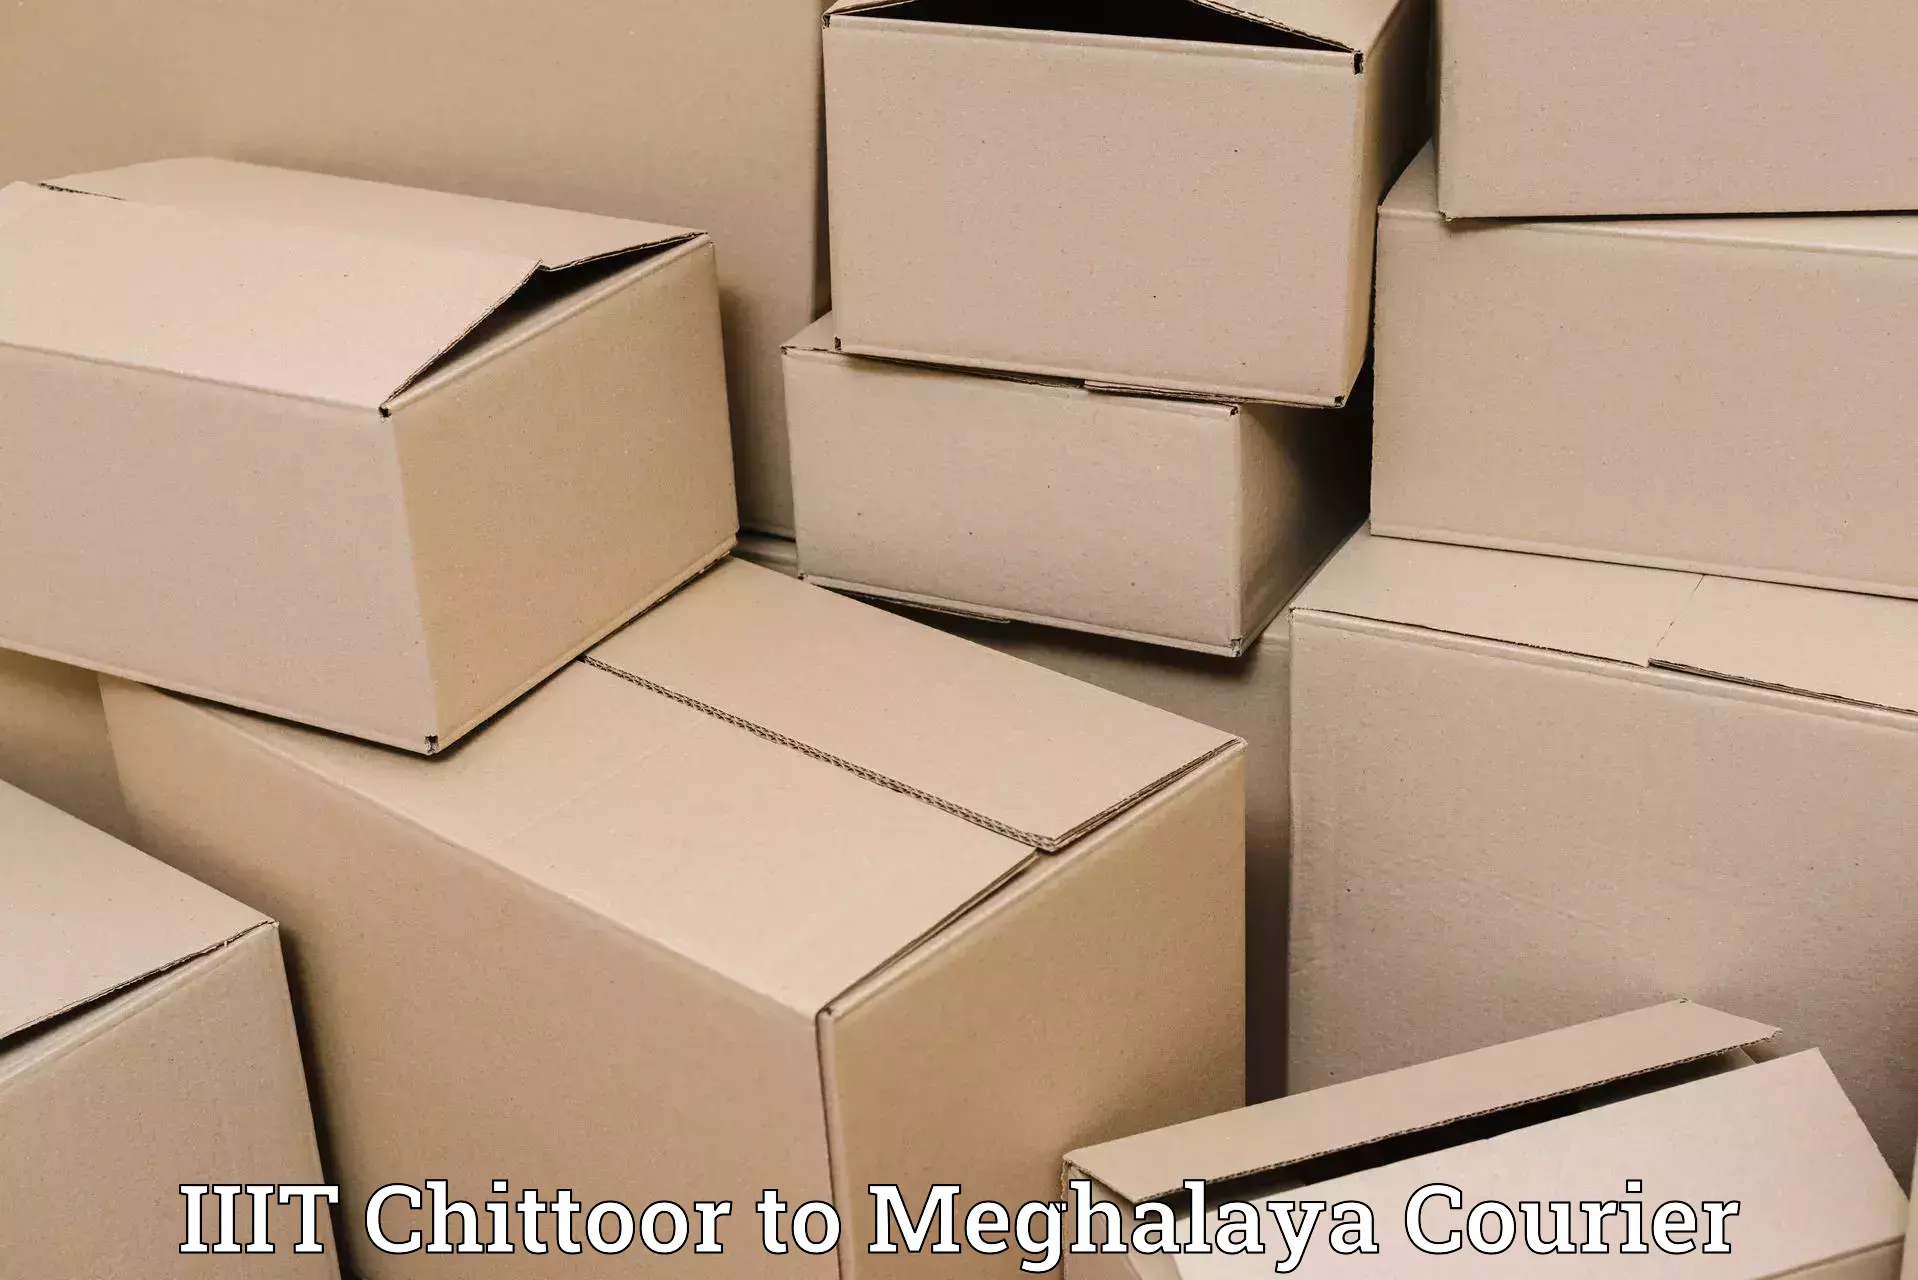 Easy access courier services IIIT Chittoor to Jowai